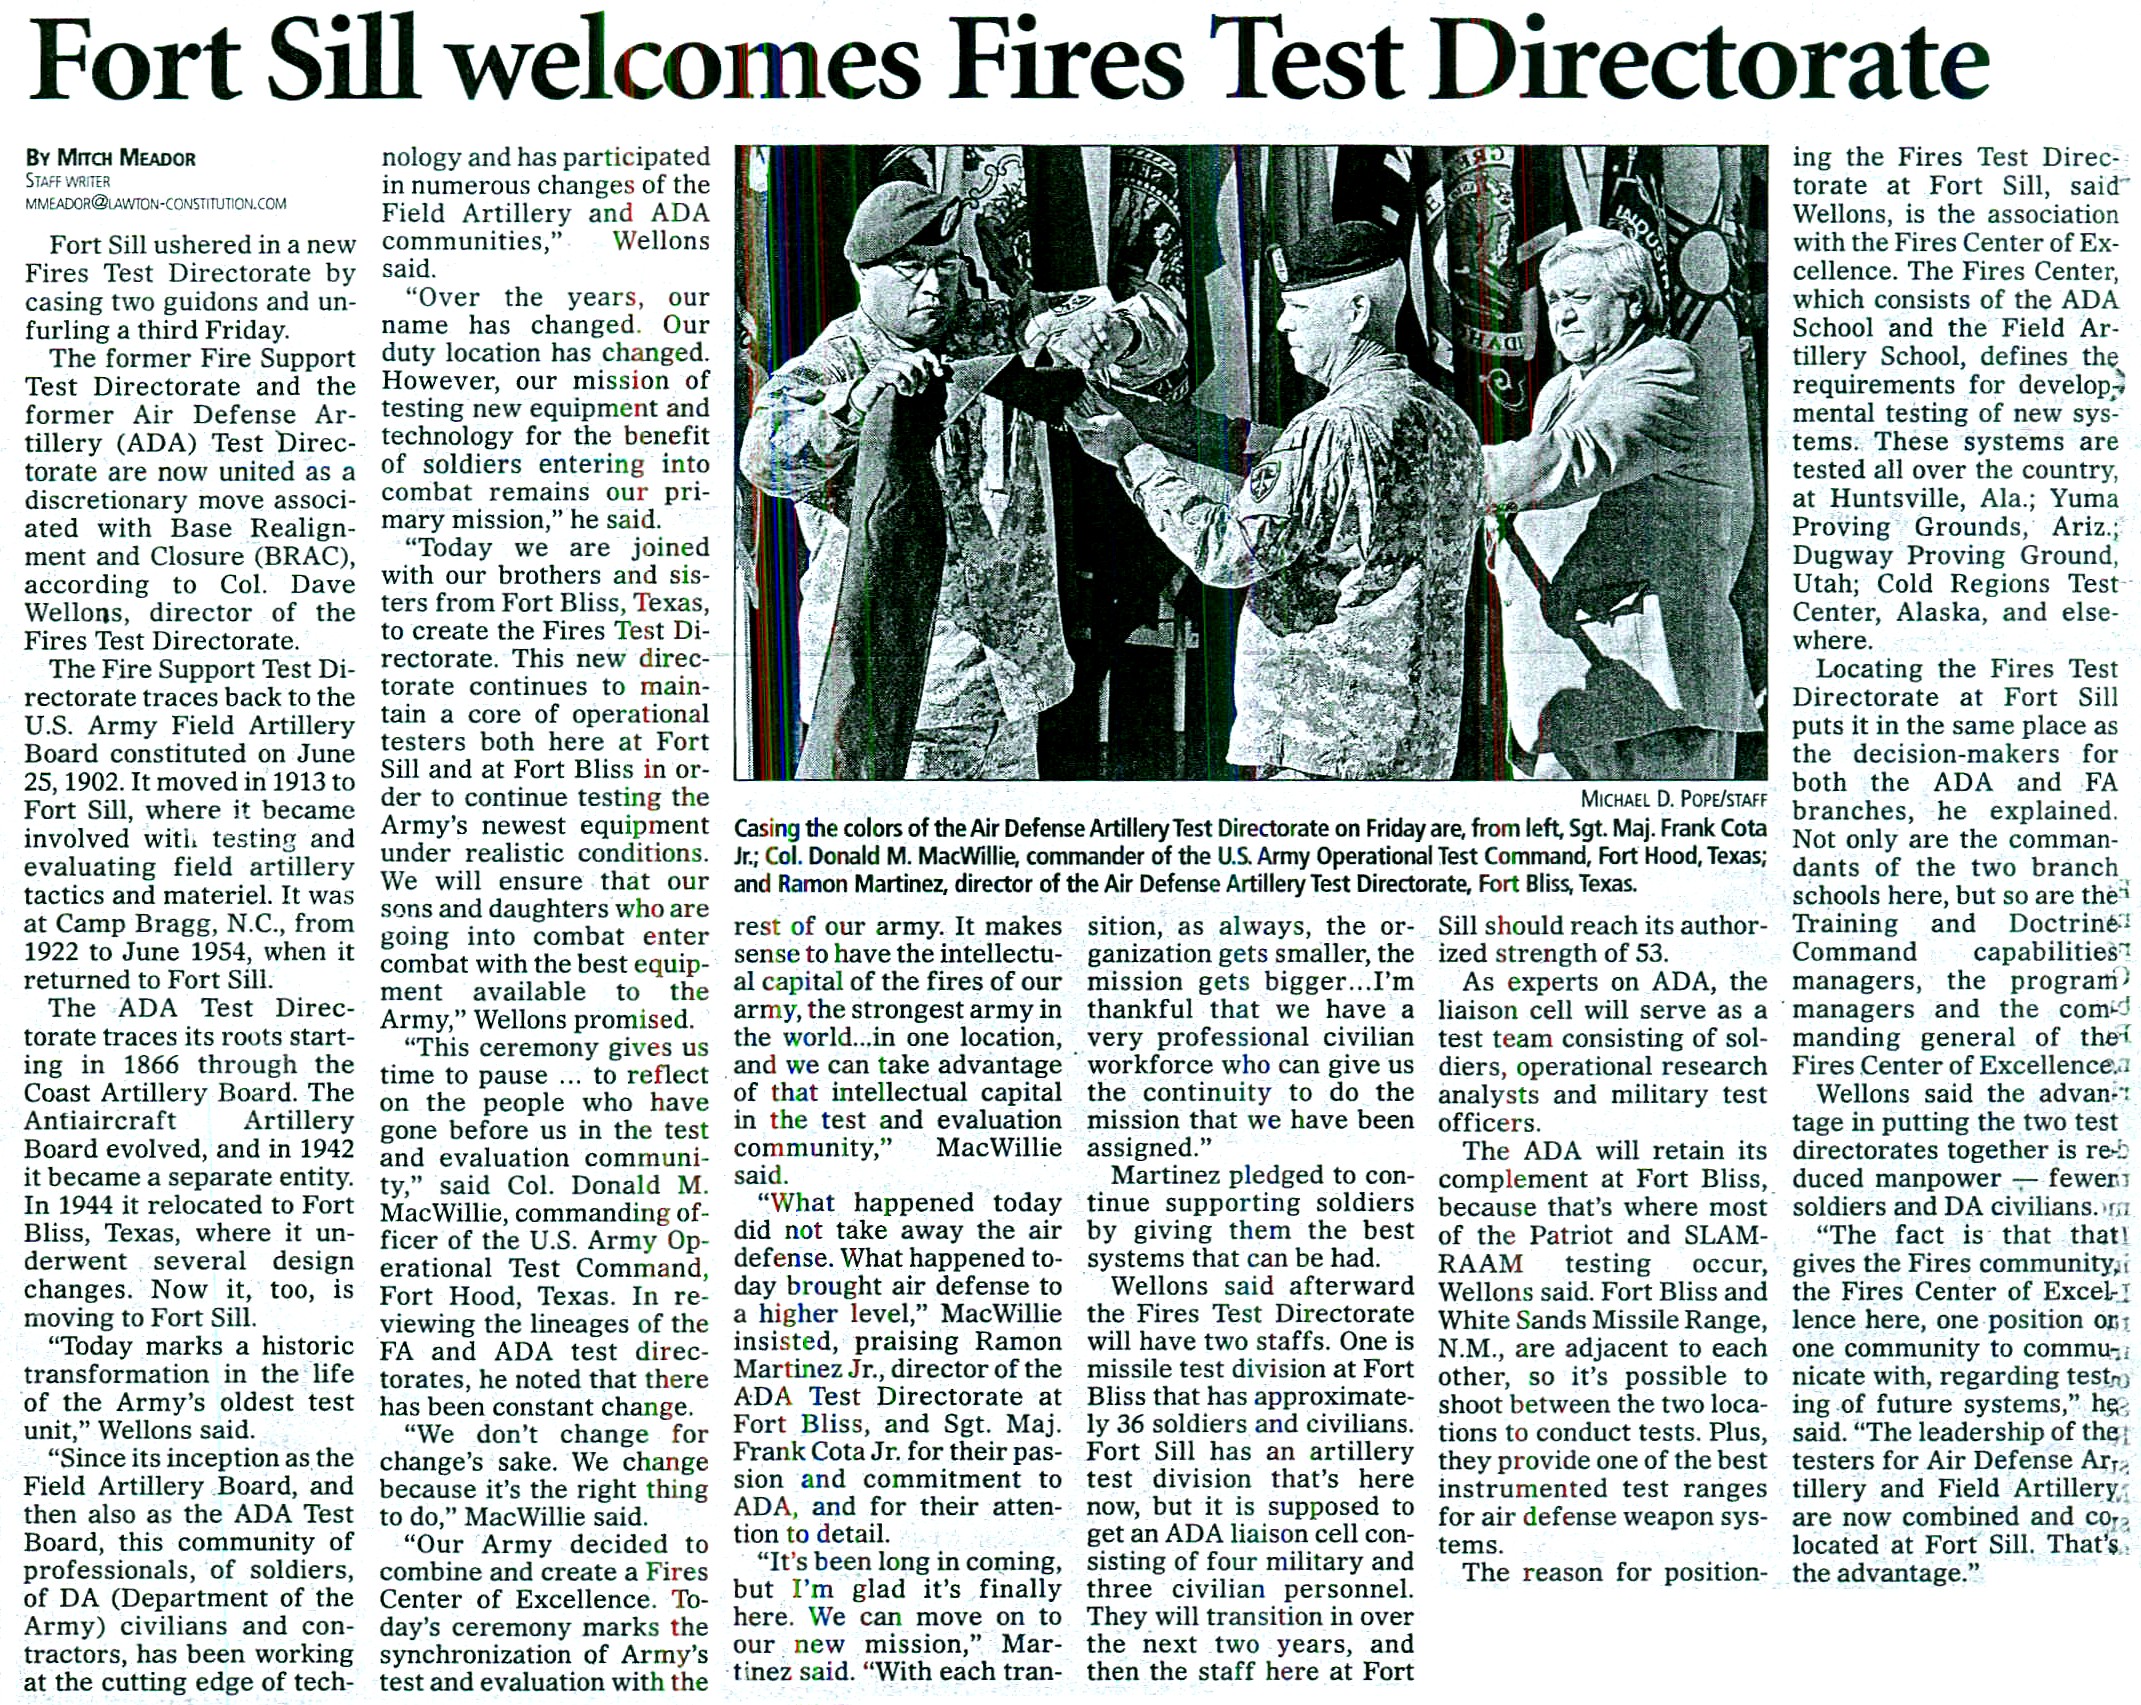 FTD ceremony article